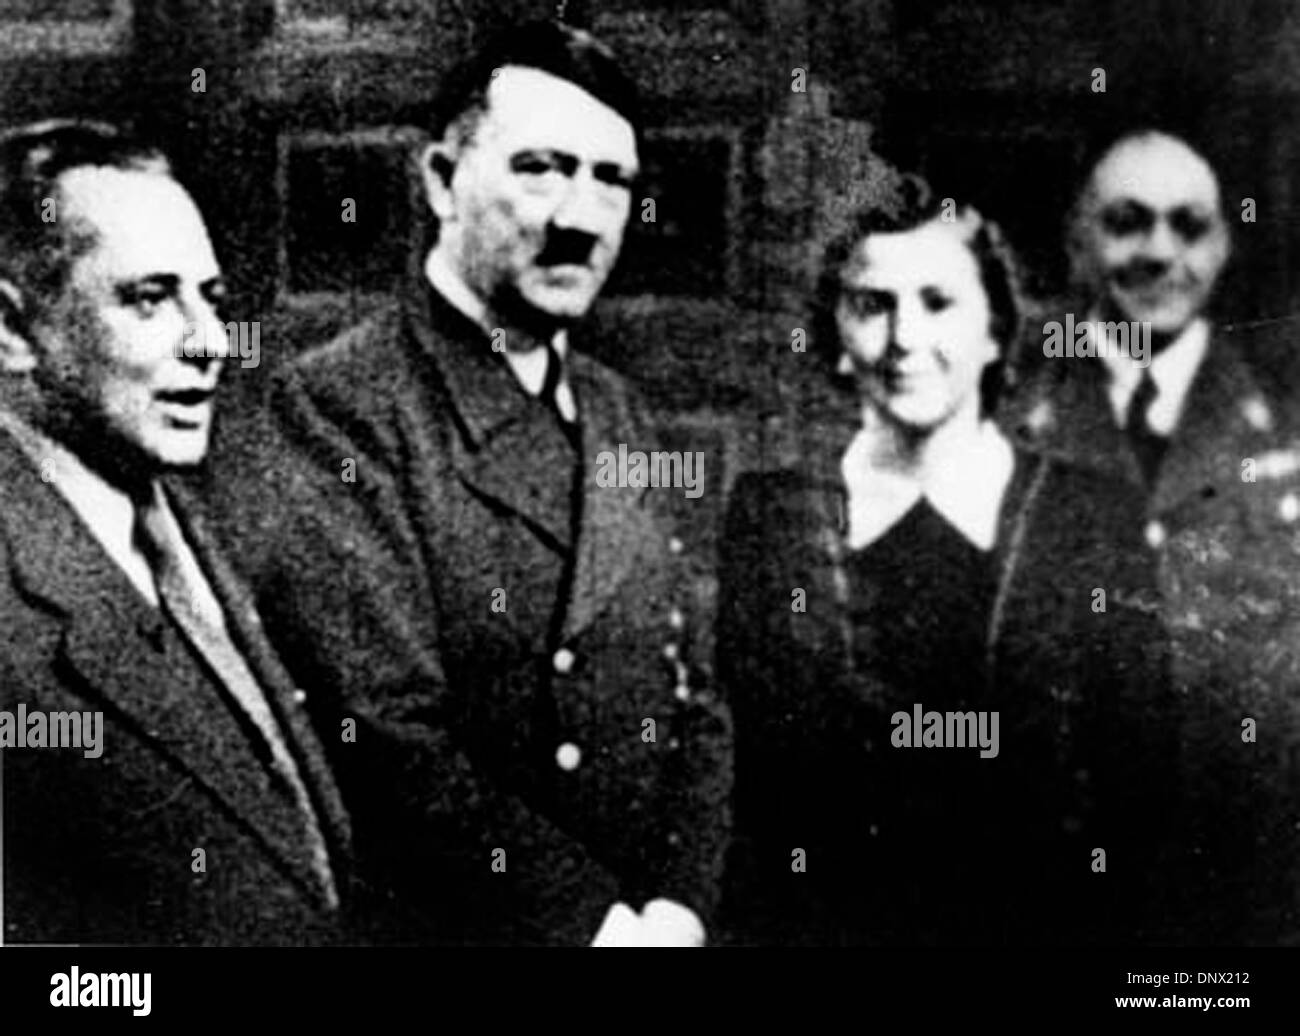 April 20, 1938 - Berlin, Germany - ADOLF HITLER at his birthday party with HEINRICH HOFFMAN, EVA BRAUN and PROF. MORELL. Adolf Hitler (April 20, 1889ÐApril 30, 1945) was the Fuhrer (Leader and Imperial chancellor) of Germany from 1933 to his death. He was leader of the National Socialist German Workers Party (NSDAP), better known as the Nazi Party. At the height of his power, the a Stock Photo